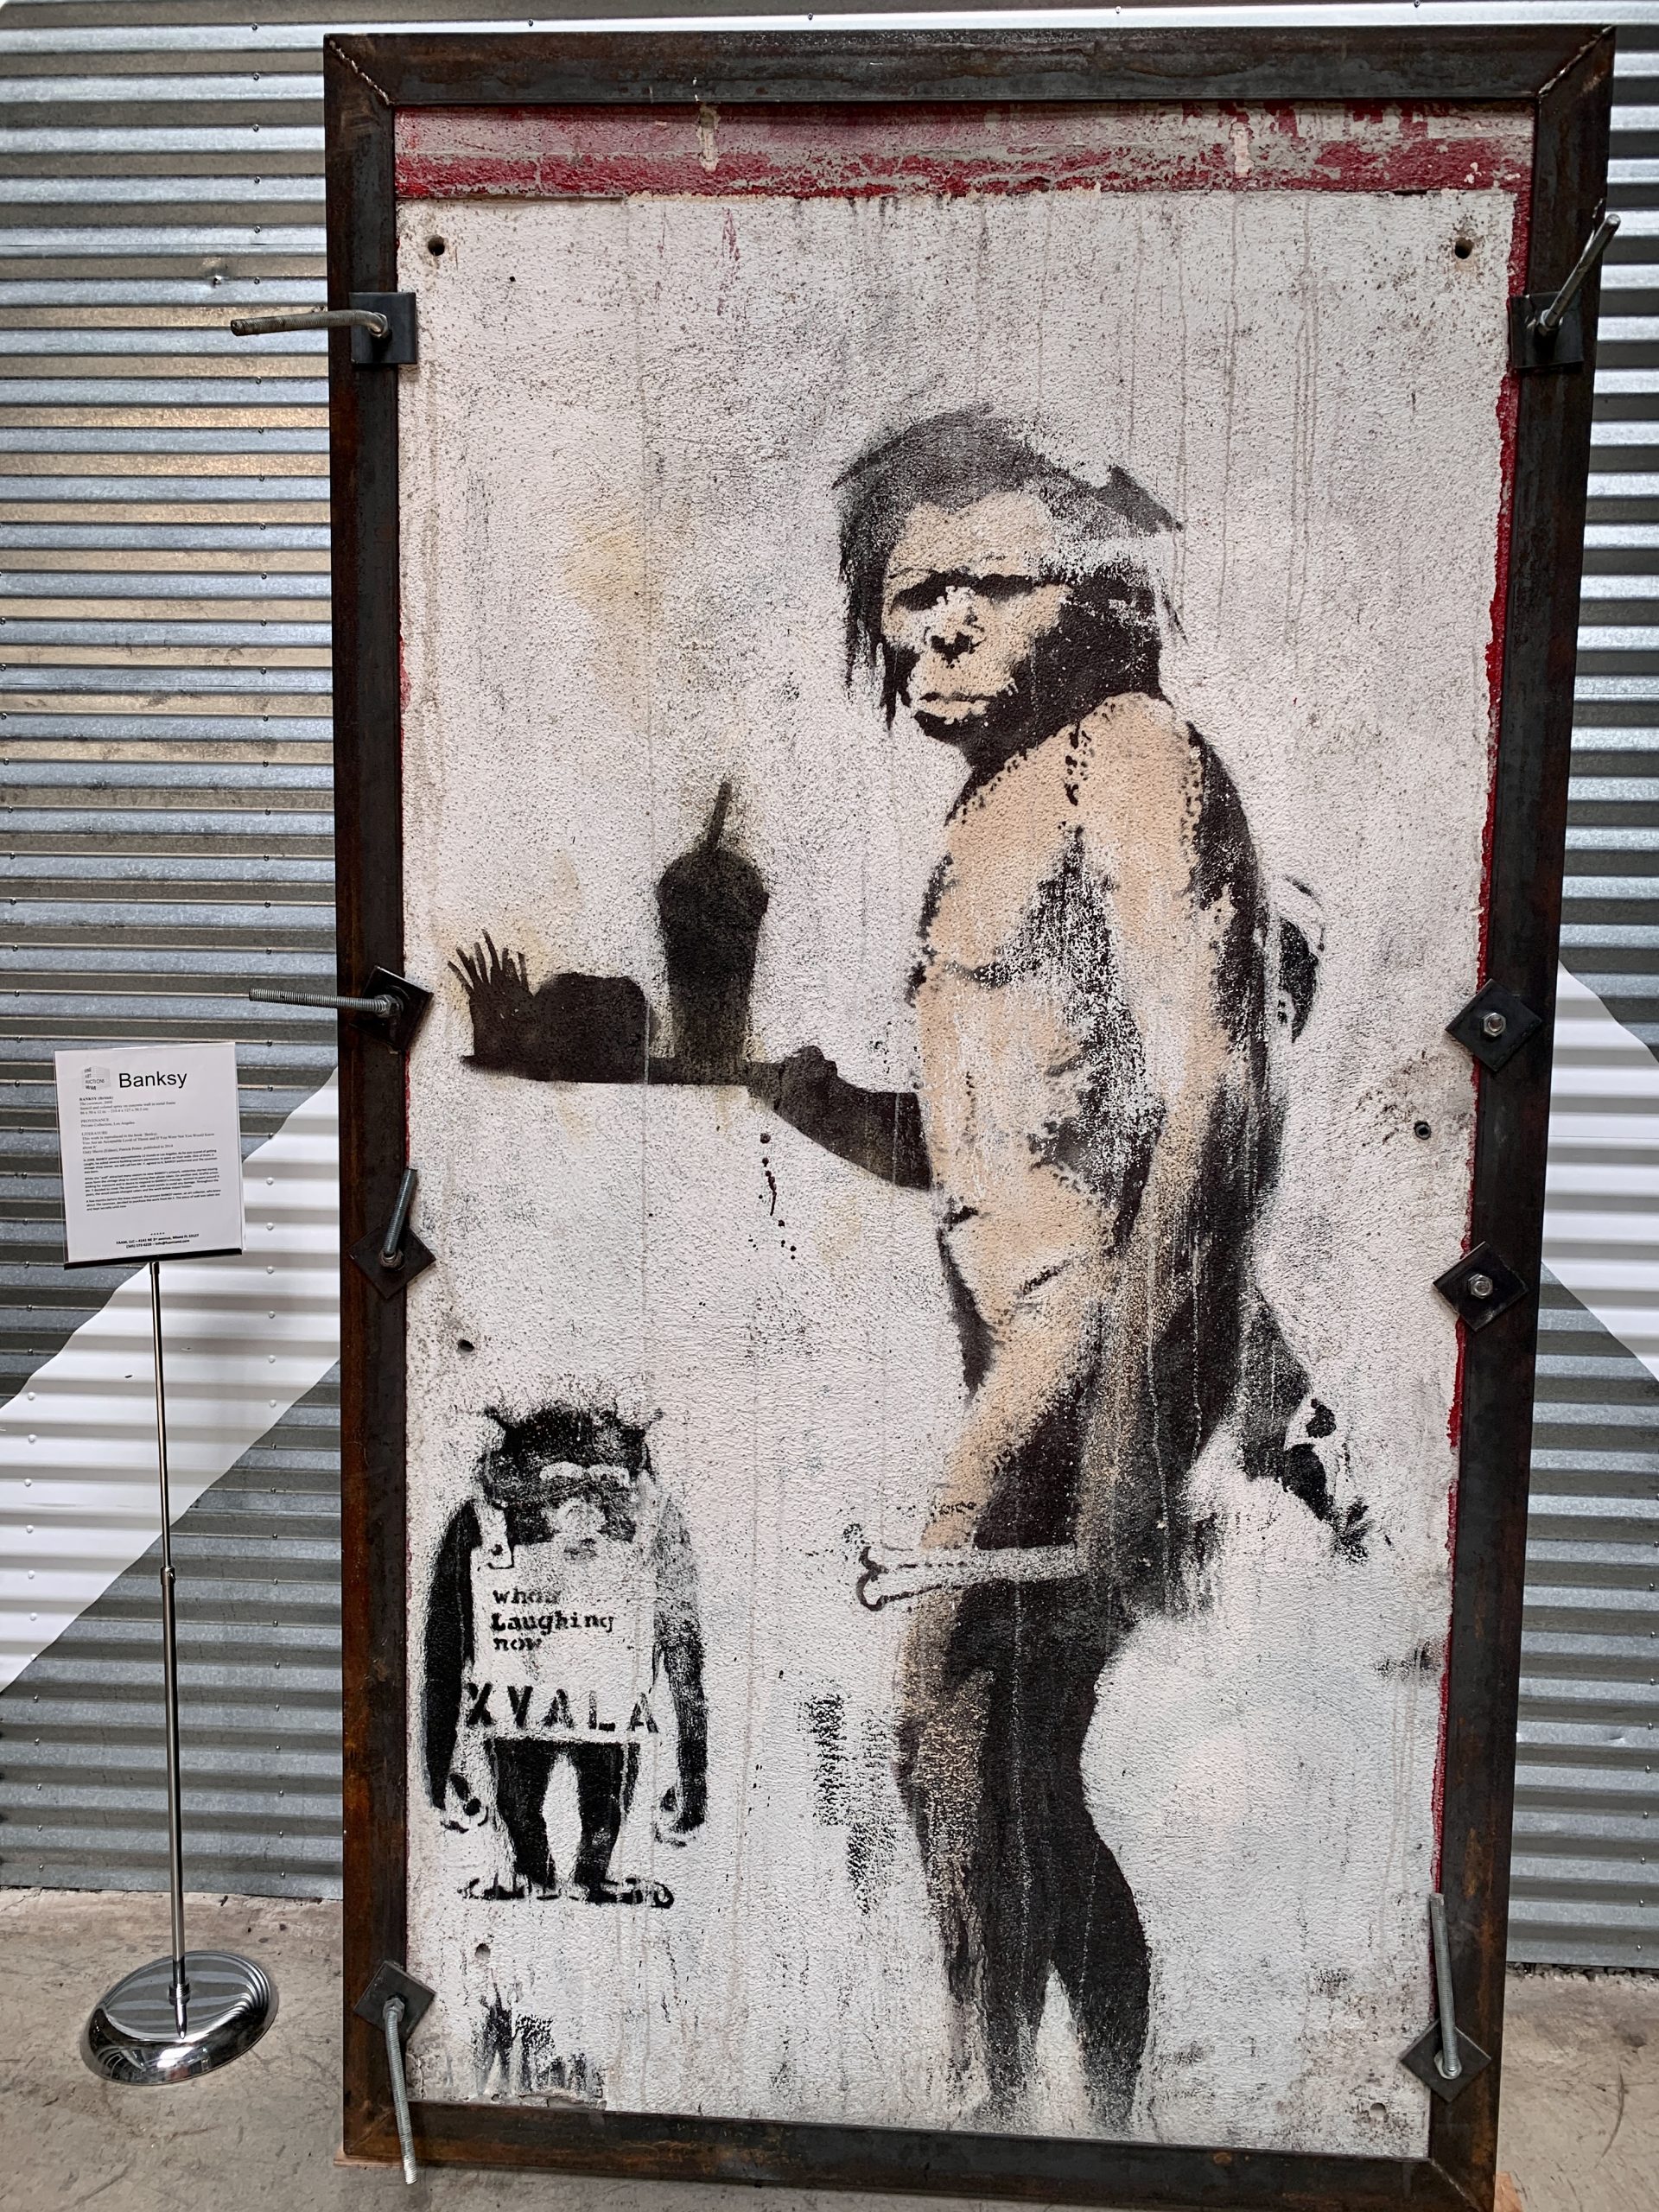 Banksy artwork in an Art Gallery in Miami Design District